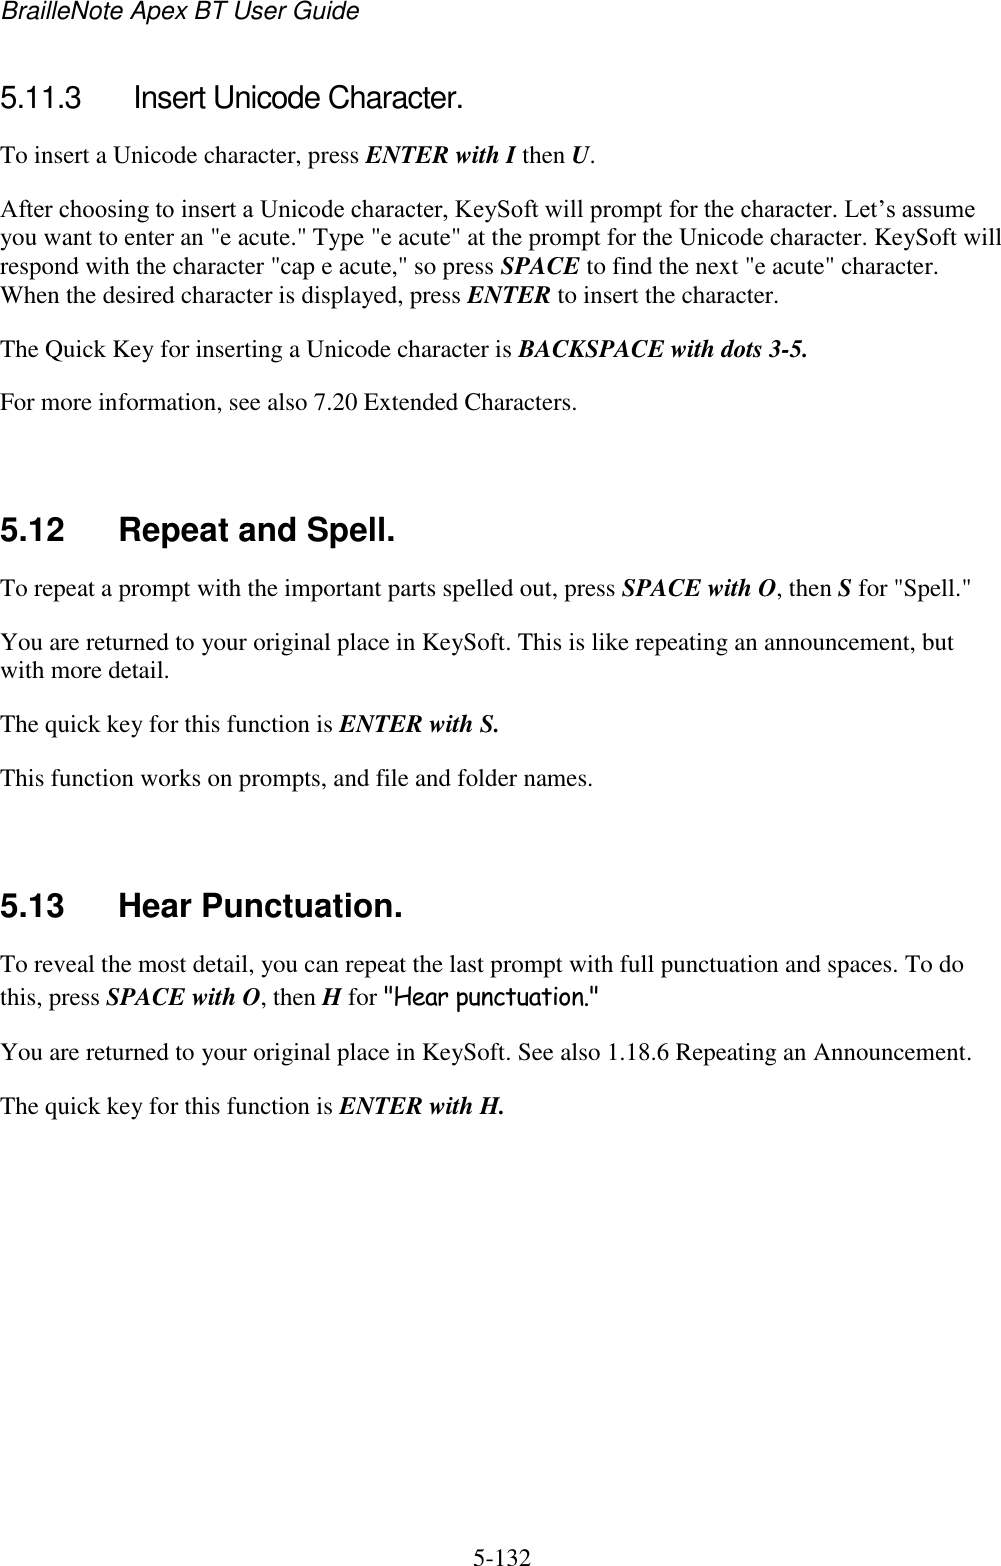 BrailleNote Apex BT User Guide   5-132   5.11.3  Insert Unicode Character. To insert a Unicode character, press ENTER with I then U. After choosing to insert a Unicode character, KeySoft will prompt for the character. Let‟s assume you want to enter an &quot;e acute.&quot; Type &quot;e acute&quot; at the prompt for the Unicode character. KeySoft will respond with the character &quot;cap e acute,&quot; so press SPACE to find the next &quot;e acute&quot; character. When the desired character is displayed, press ENTER to insert the character. The Quick Key for inserting a Unicode character is BACKSPACE with dots 3-5. For more information, see also 7.20 Extended Characters.   5.12  Repeat and Spell. To repeat a prompt with the important parts spelled out, press SPACE with O, then S for &quot;Spell.&quot; You are returned to your original place in KeySoft. This is like repeating an announcement, but with more detail. The quick key for this function is ENTER with S. This function works on prompts, and file and folder names.   5.13  Hear Punctuation. To reveal the most detail, you can repeat the last prompt with full punctuation and spaces. To do this, press SPACE with O, then H for &quot;Hear punctuation.&quot; You are returned to your original place in KeySoft. See also 1.18.6 Repeating an Announcement. The quick key for this function is ENTER with H.   